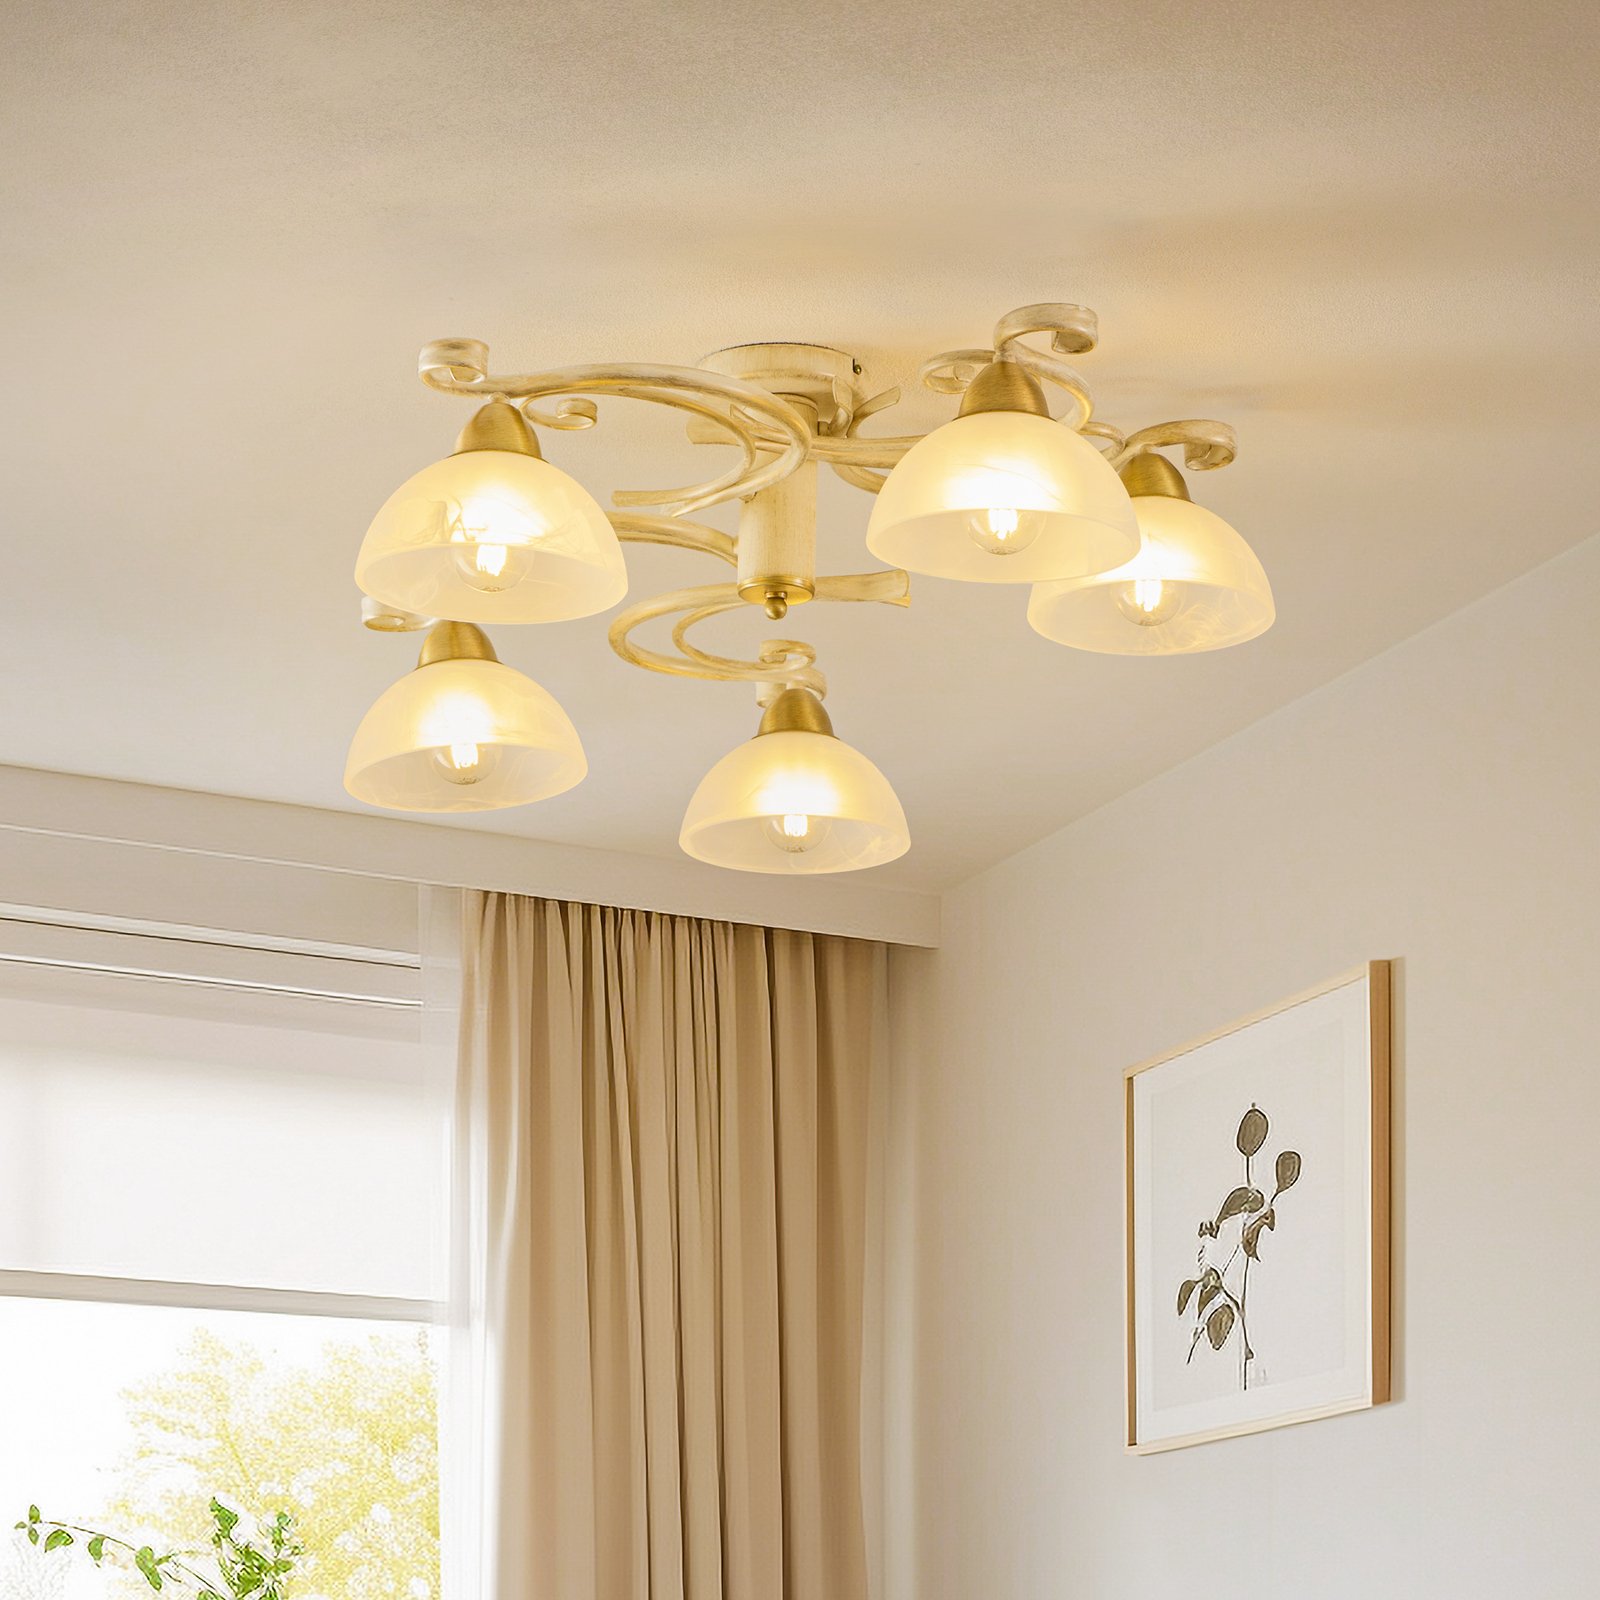 Flora ceiling lamp 5 glass lampshades, white/brass